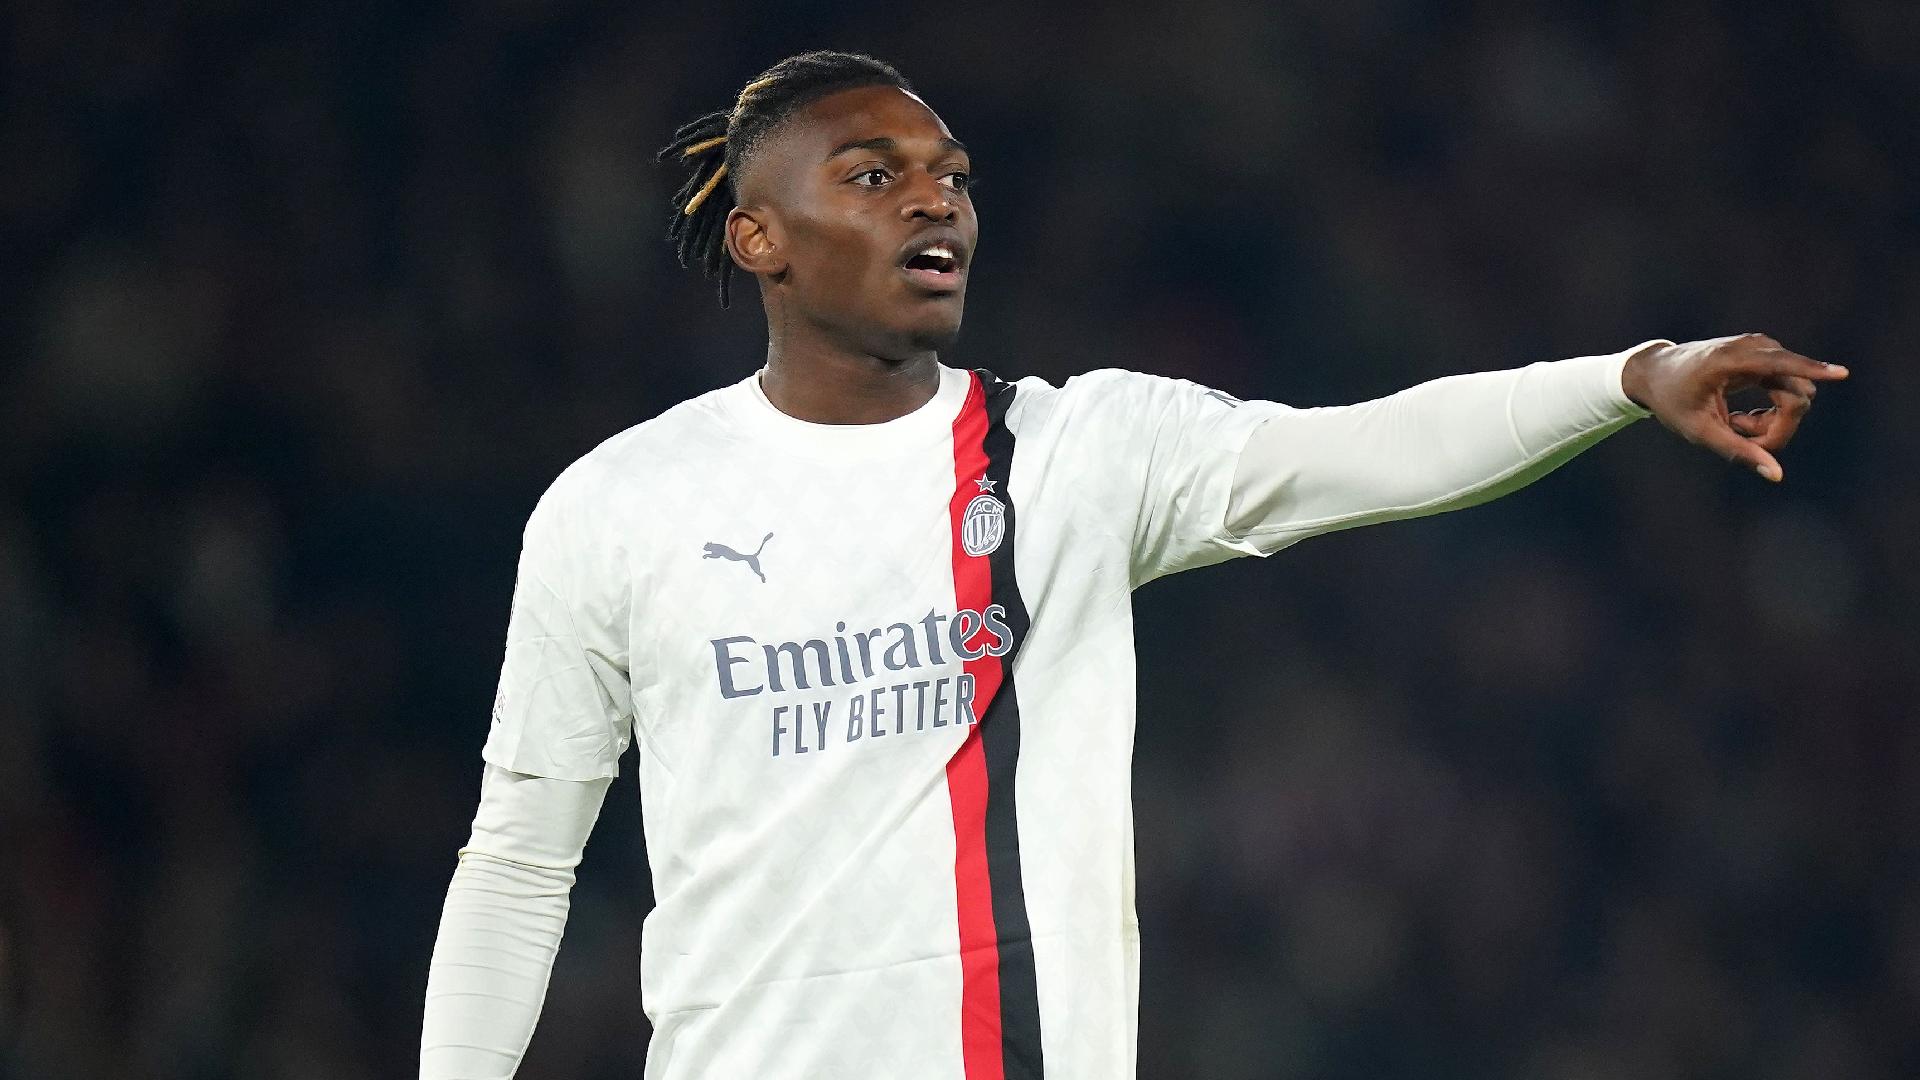 AC Milan offer support to Rafael Leao after alleged racist abuse on social media